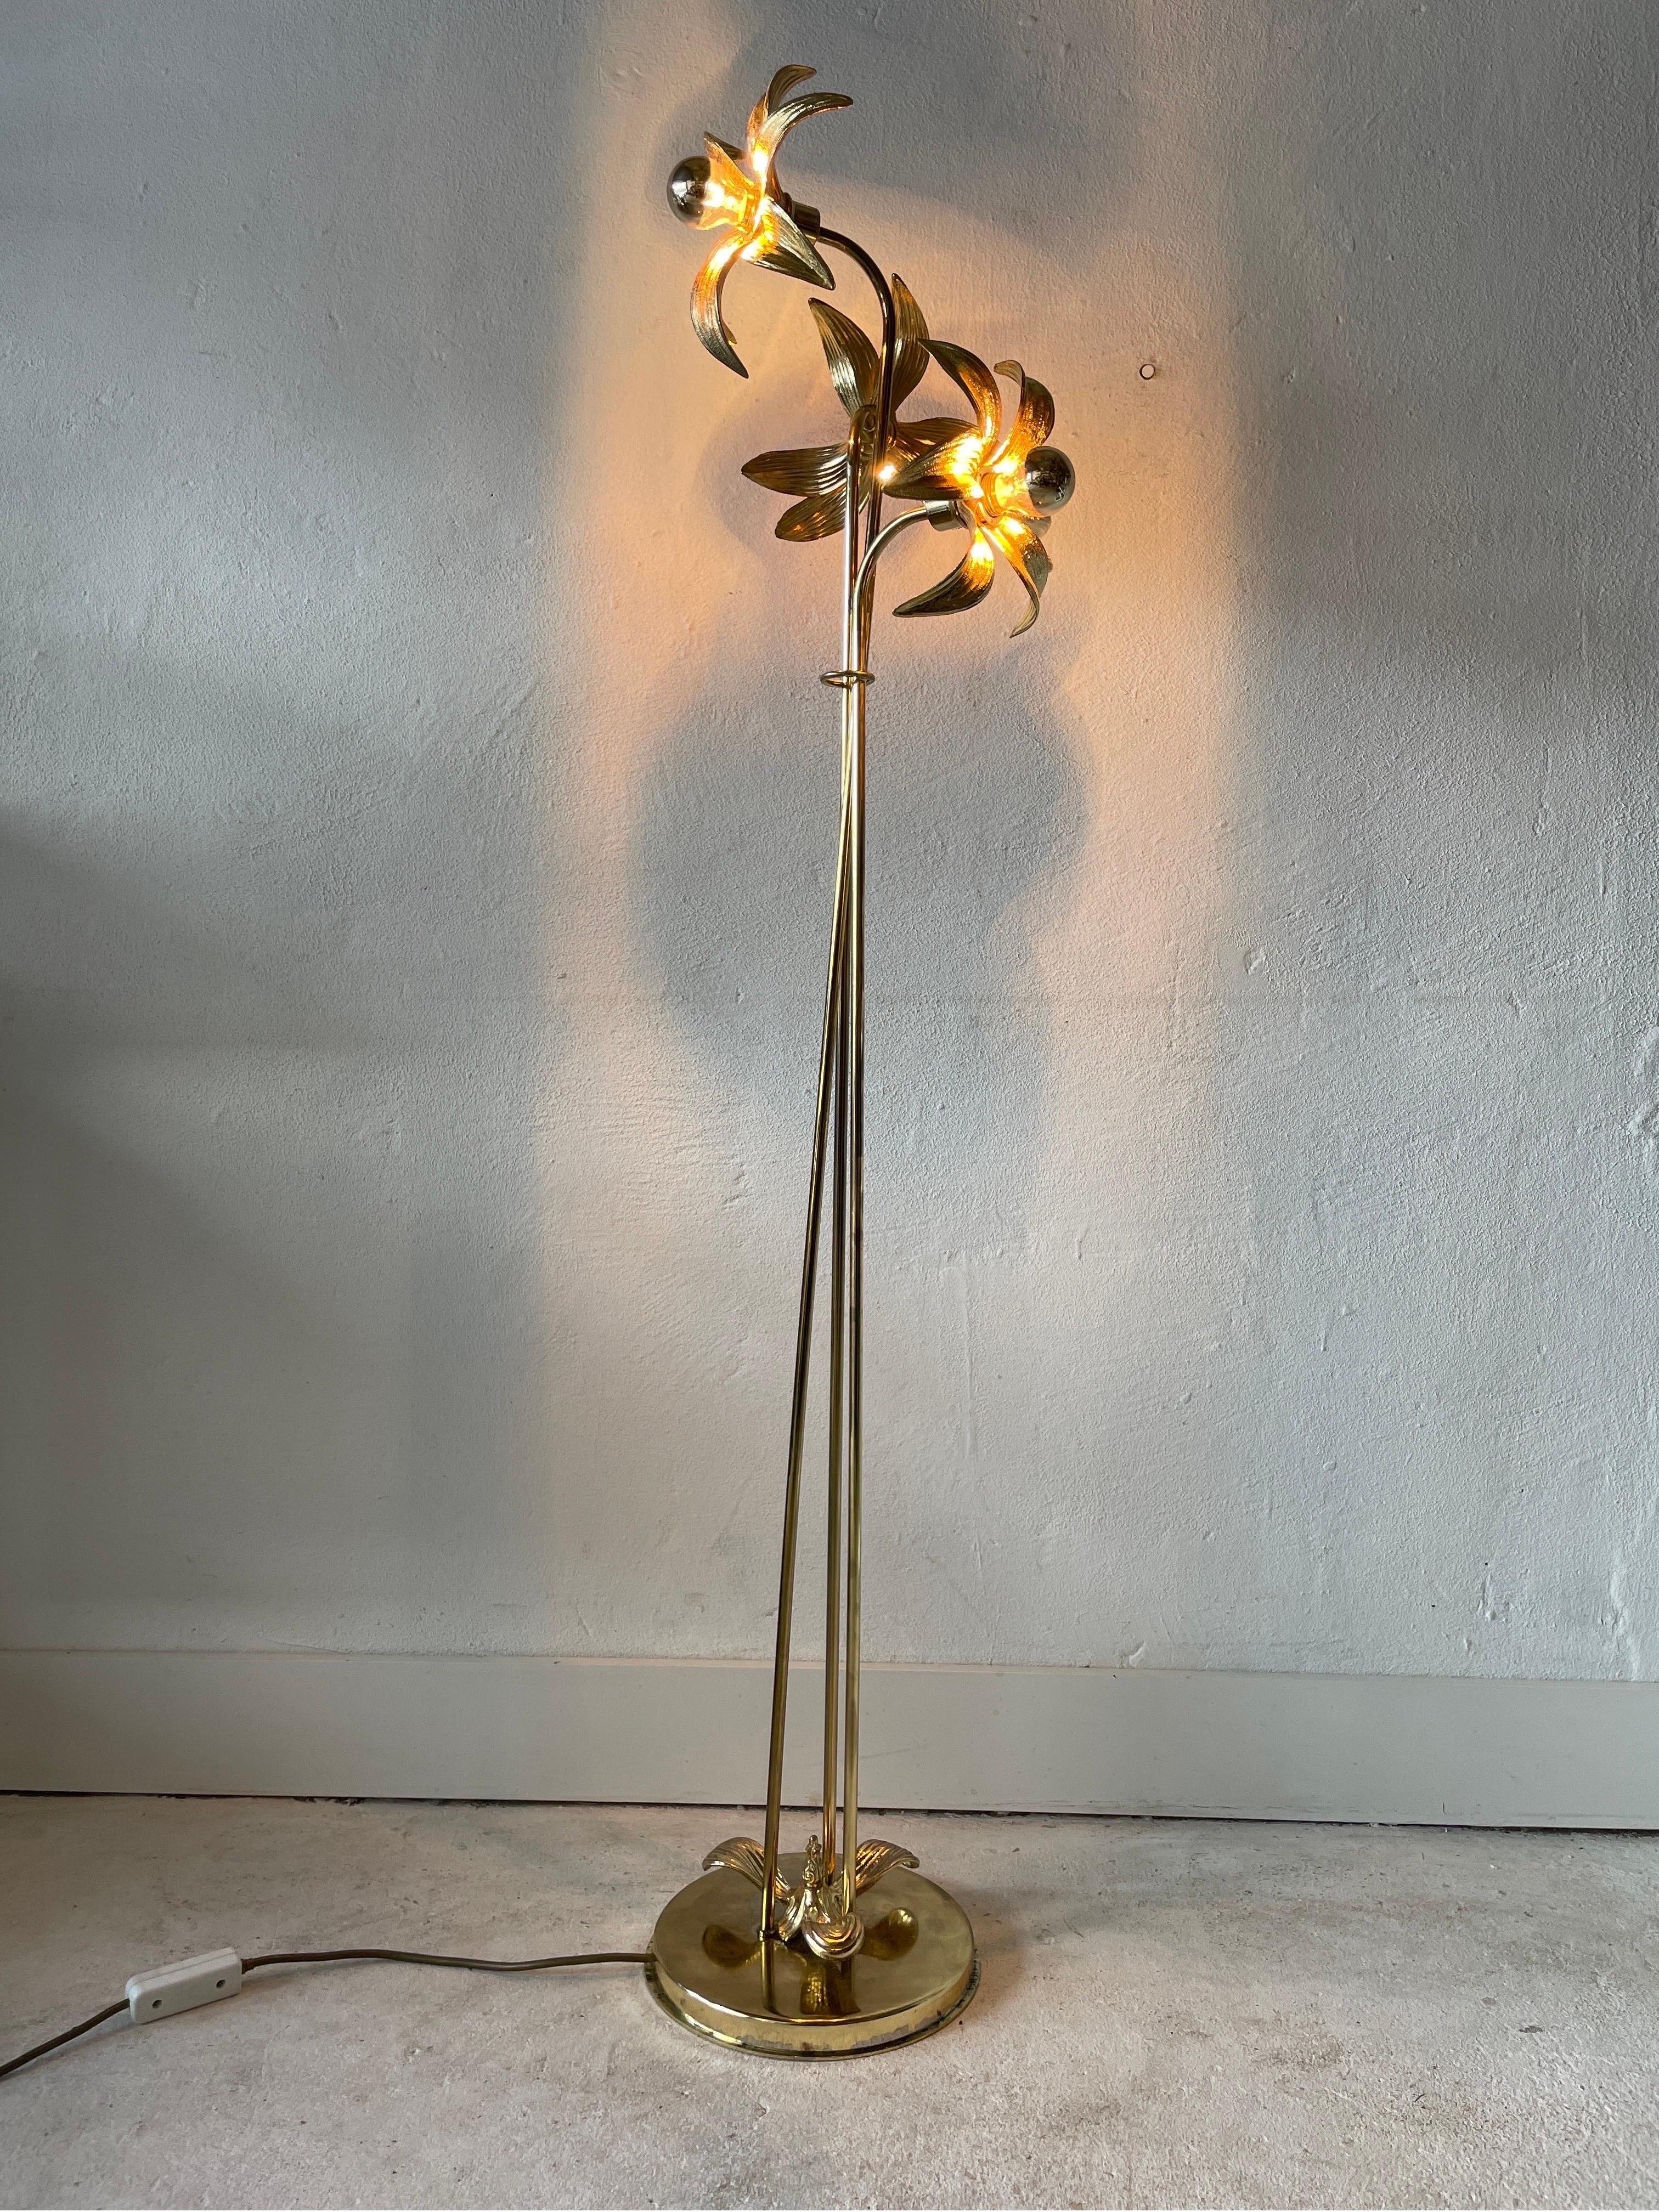 Triple Flower Shade Brass Floor Lamp by Willy Daro for Massive, 1970s, Germany For Sale 3